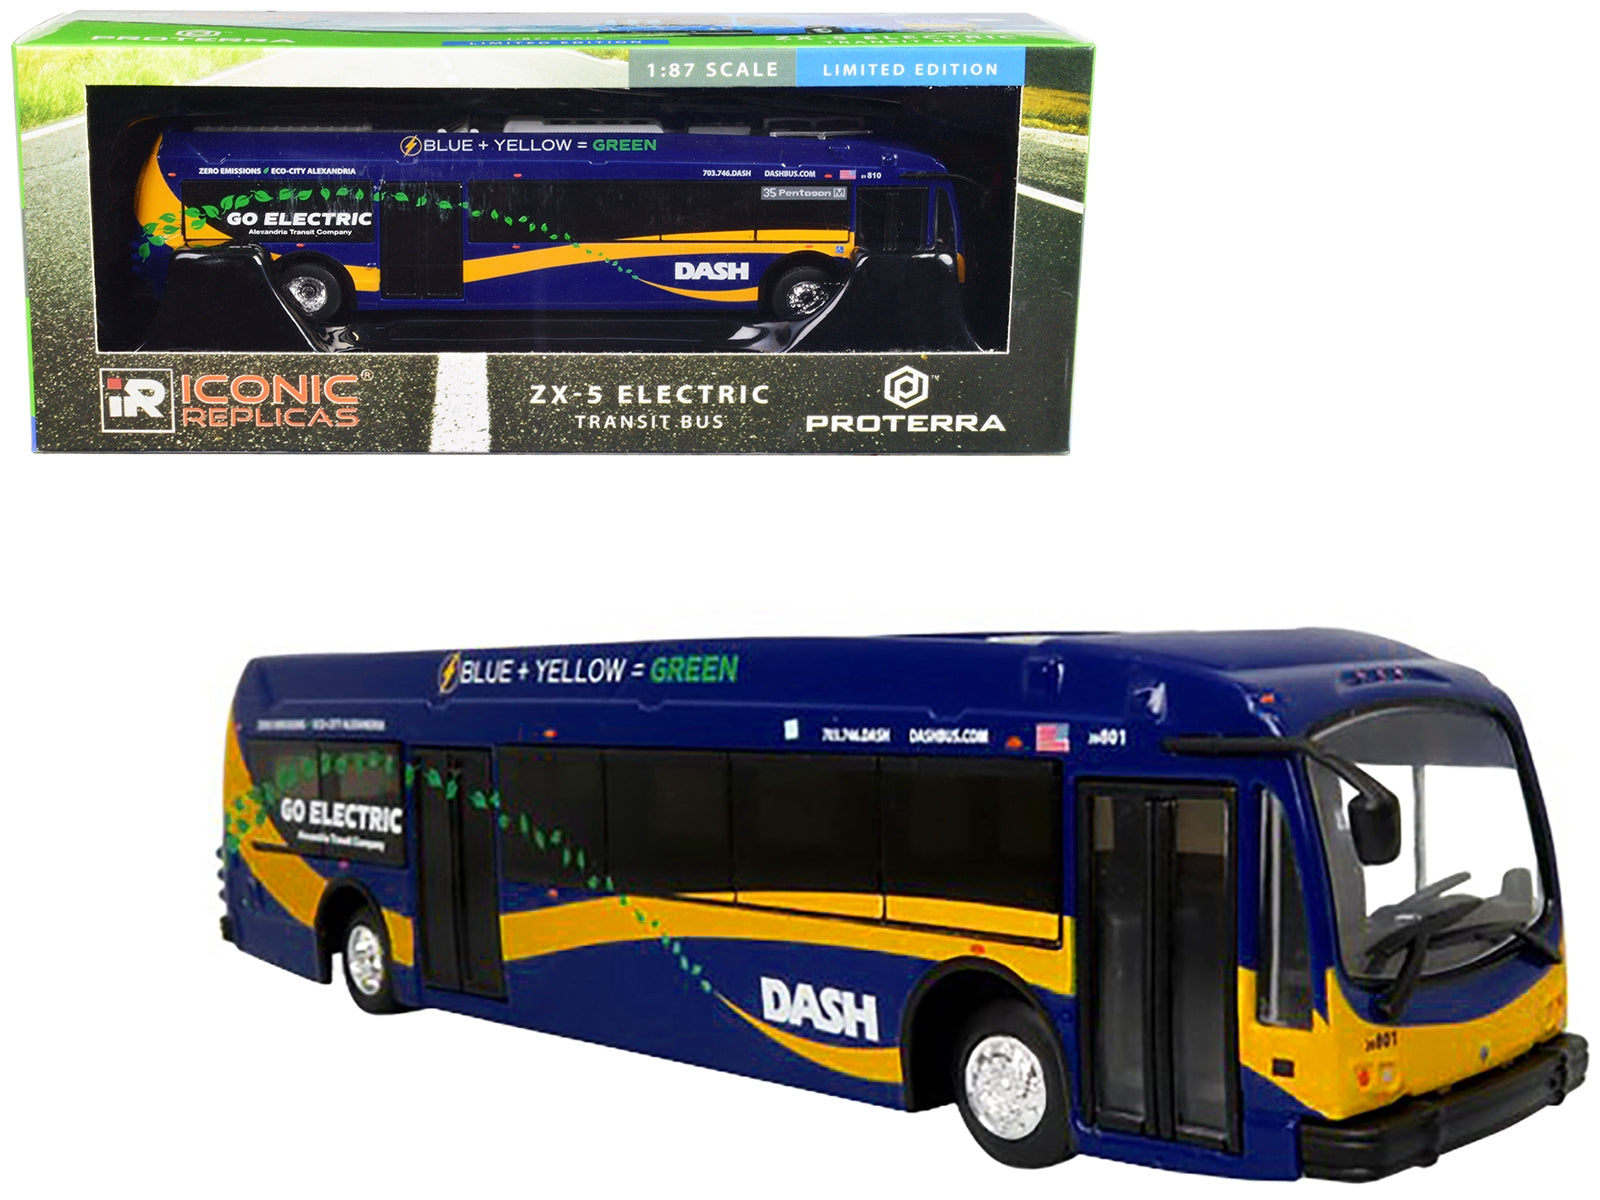 Proterra ZX5 Electric Transit Bus "Alexandria Transit Co." DASH "35 Pentagon" 1/87 (HO) Diecast Model by Iconic Replicas Iconic Replicas